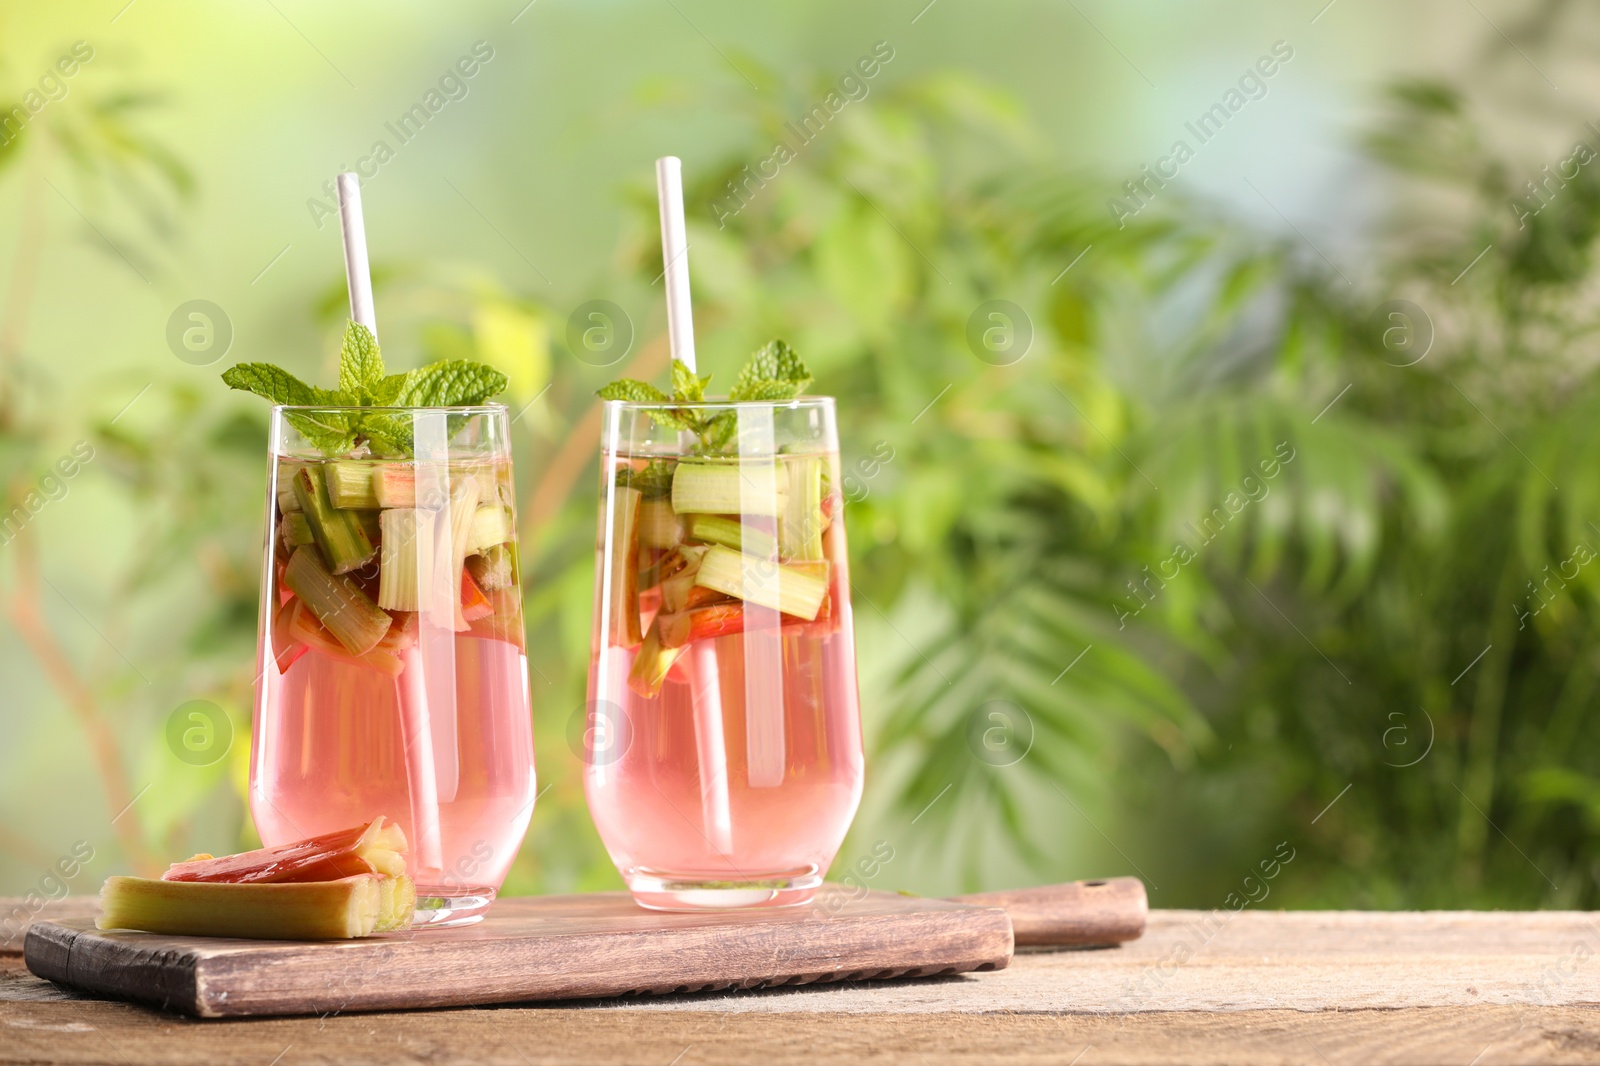 Photo of Glasses of tasty rhubarb cocktail on wooden table outdoors, space for text